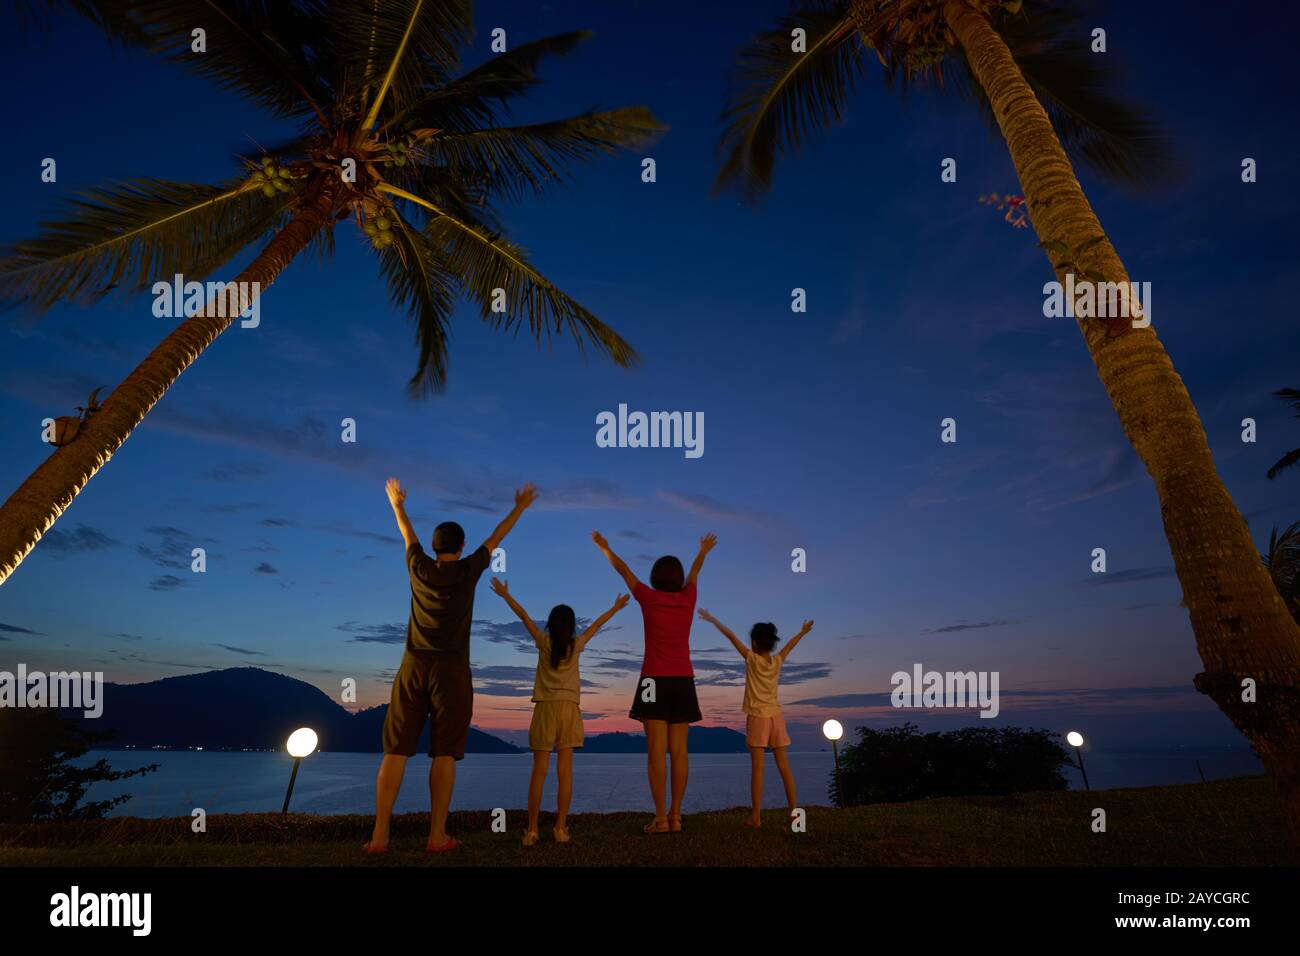 The family raised their hands and cheered to enjoy the seaside at dusk Stock Photo